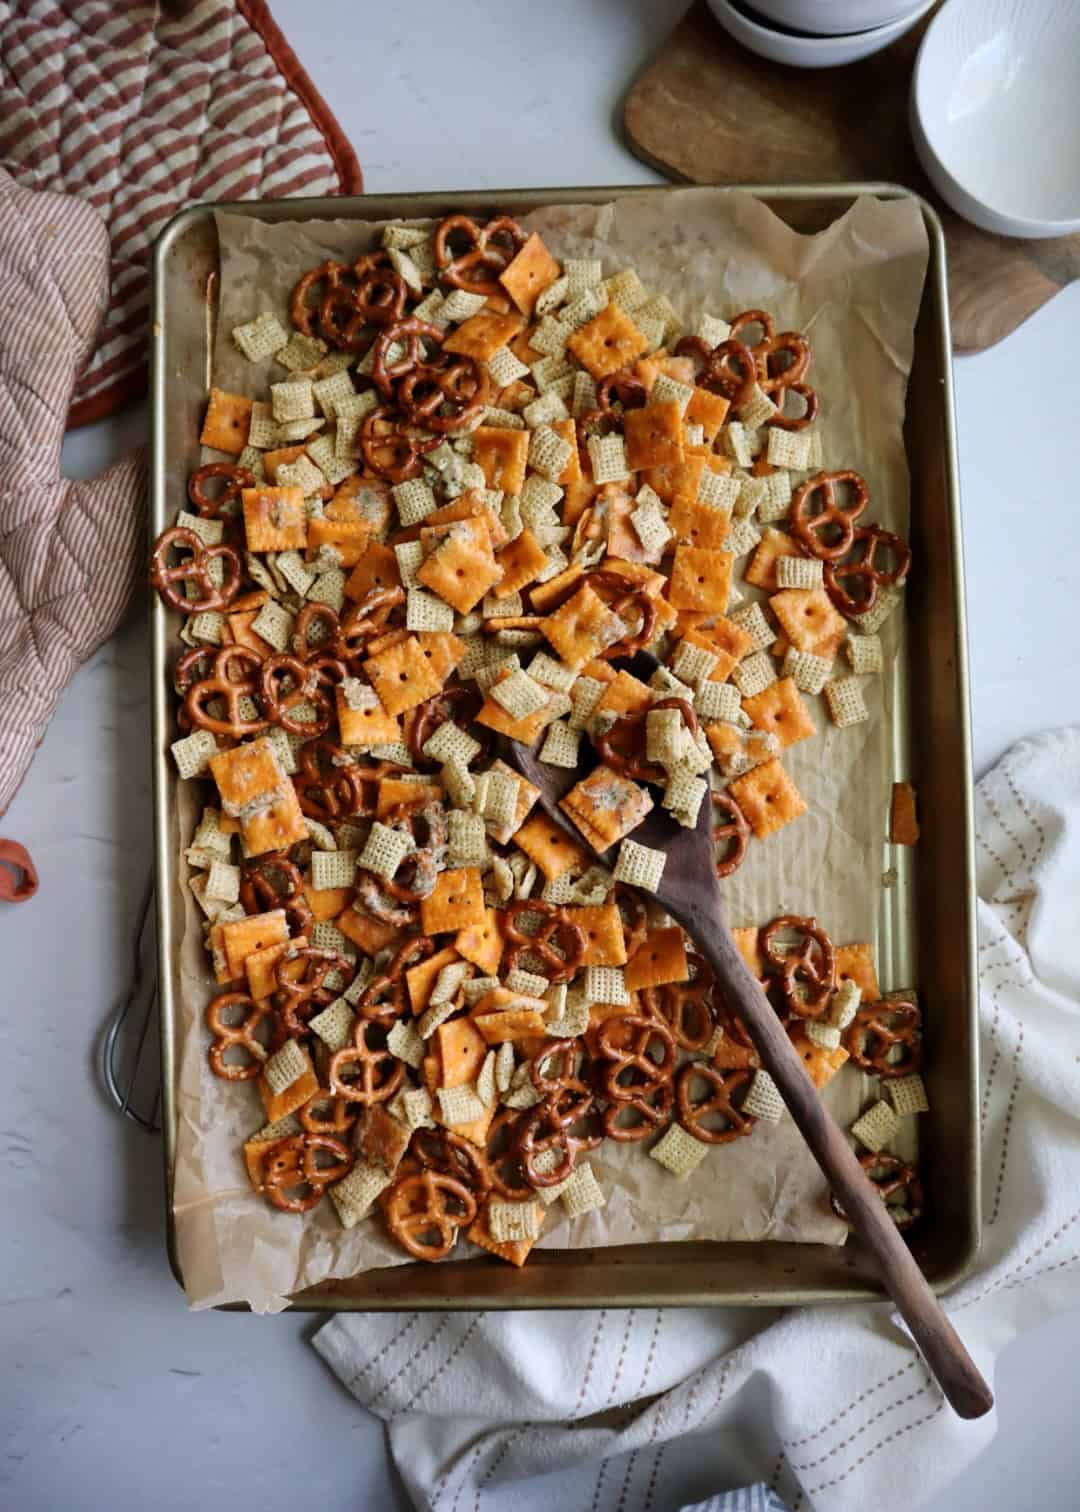 ranch snack mix on a baking tray out of the oven